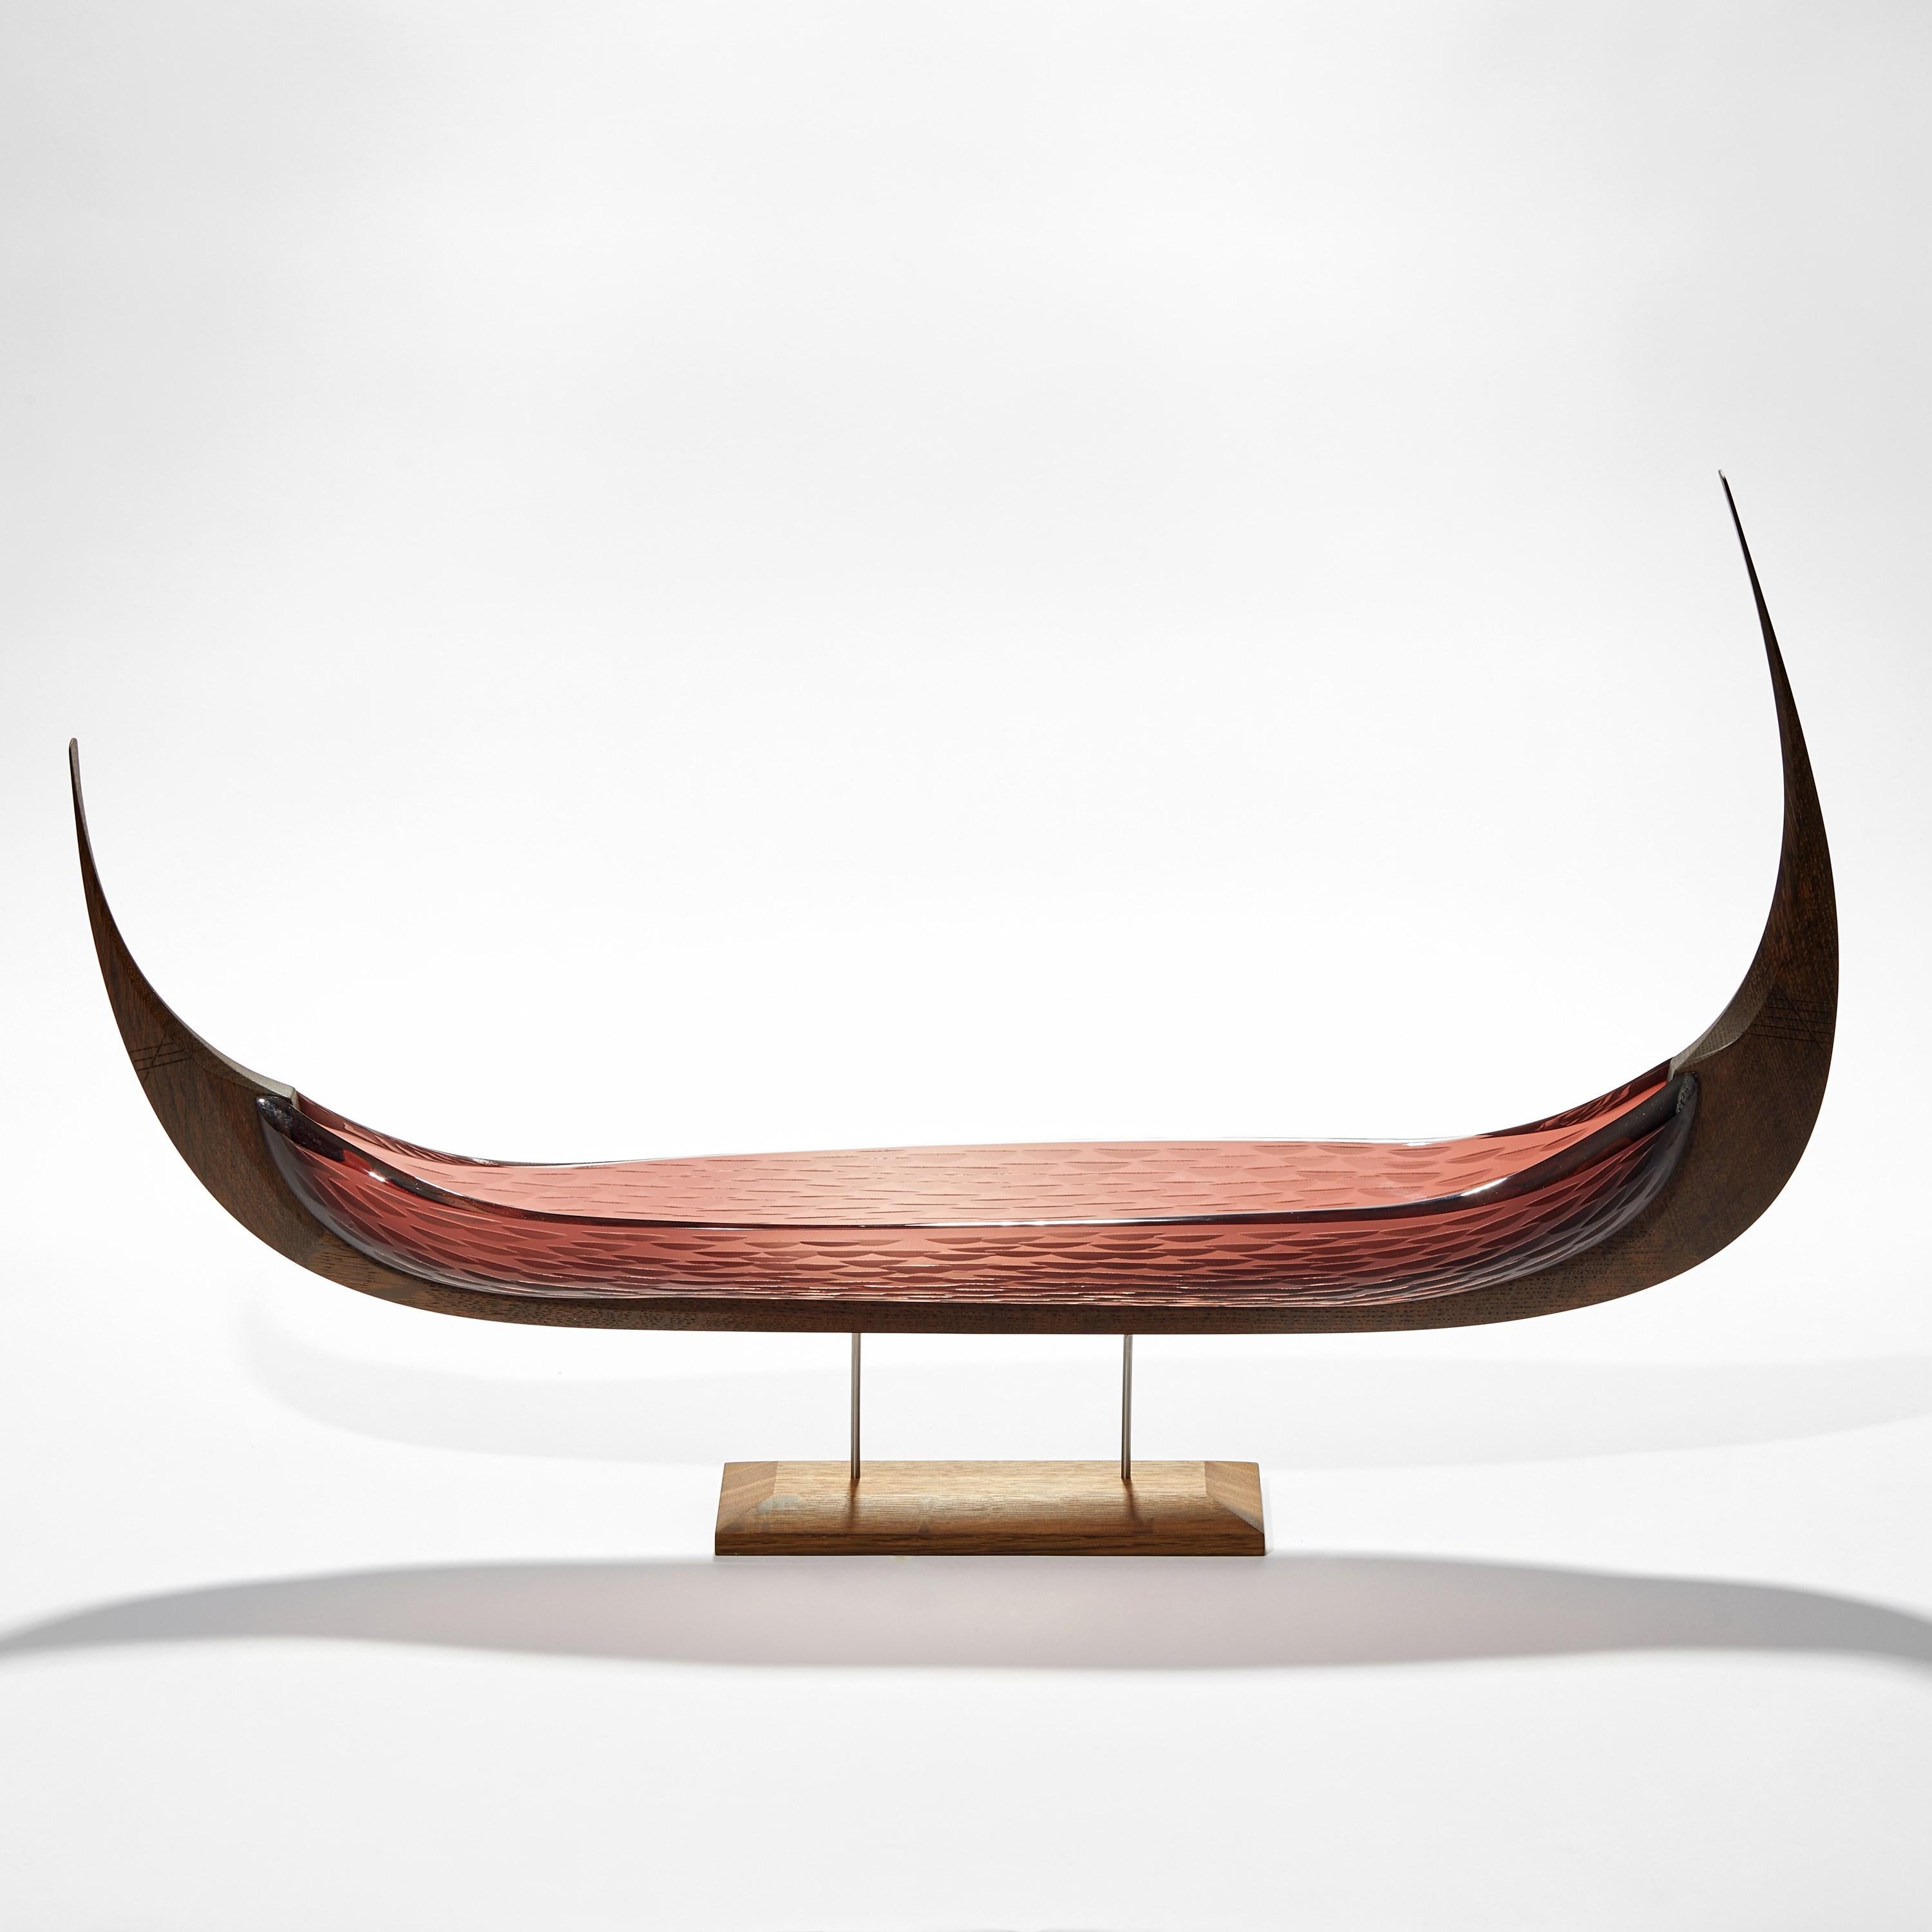 Fine cabinet making & crafted oak with handblown & cut tea/amber/brown glass combine to create this unique sculpture 